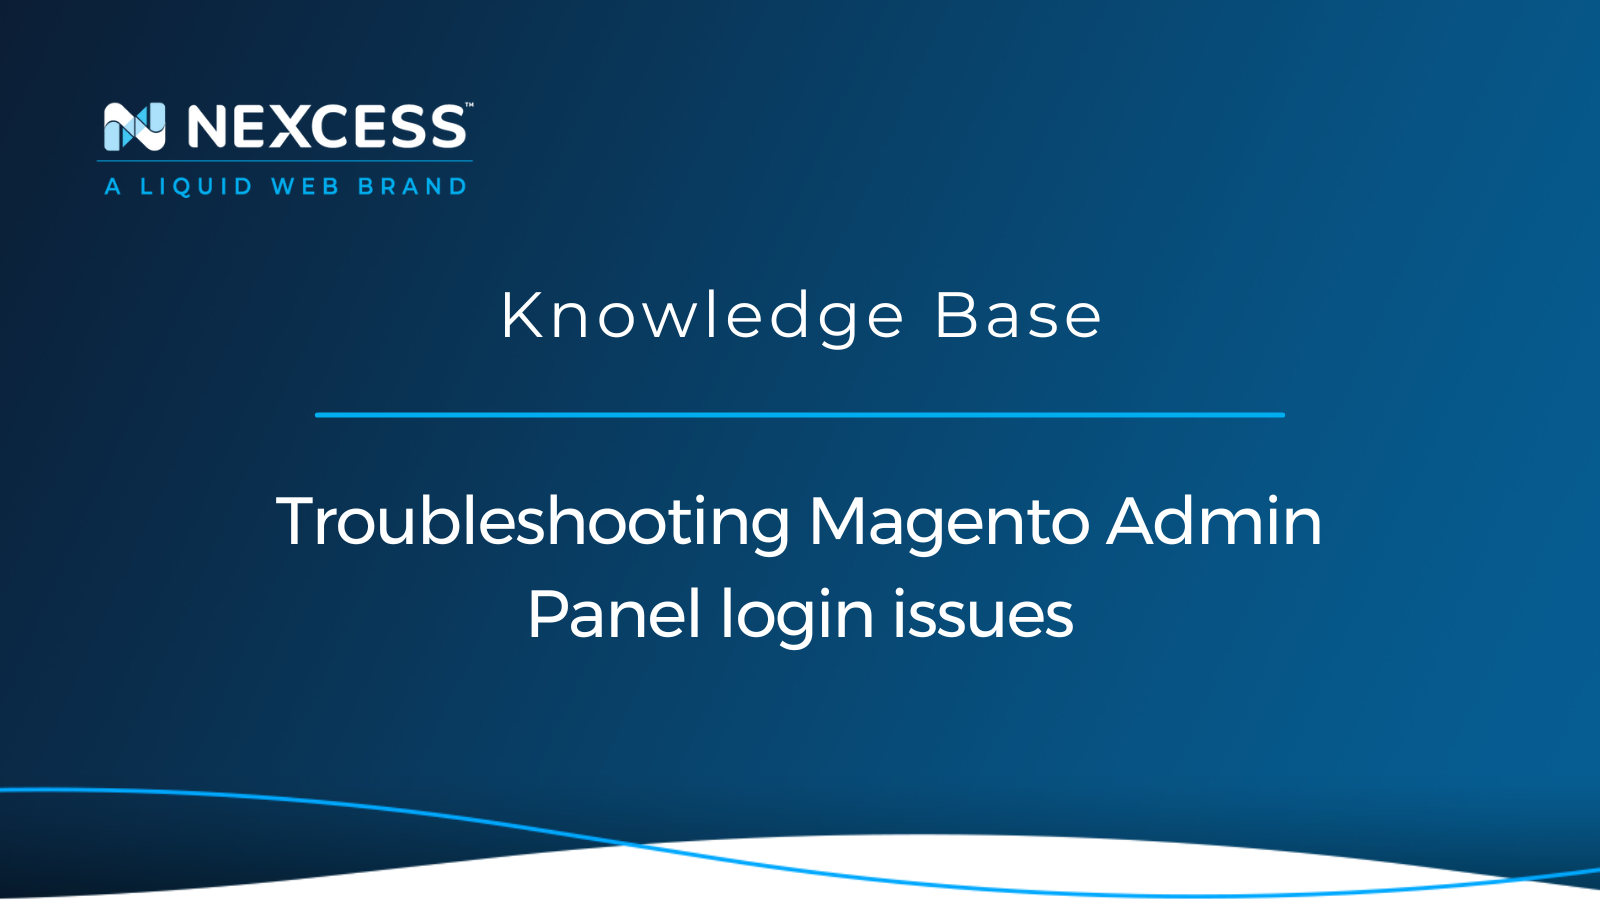 Troubleshooting Magento Admin Panel login issues